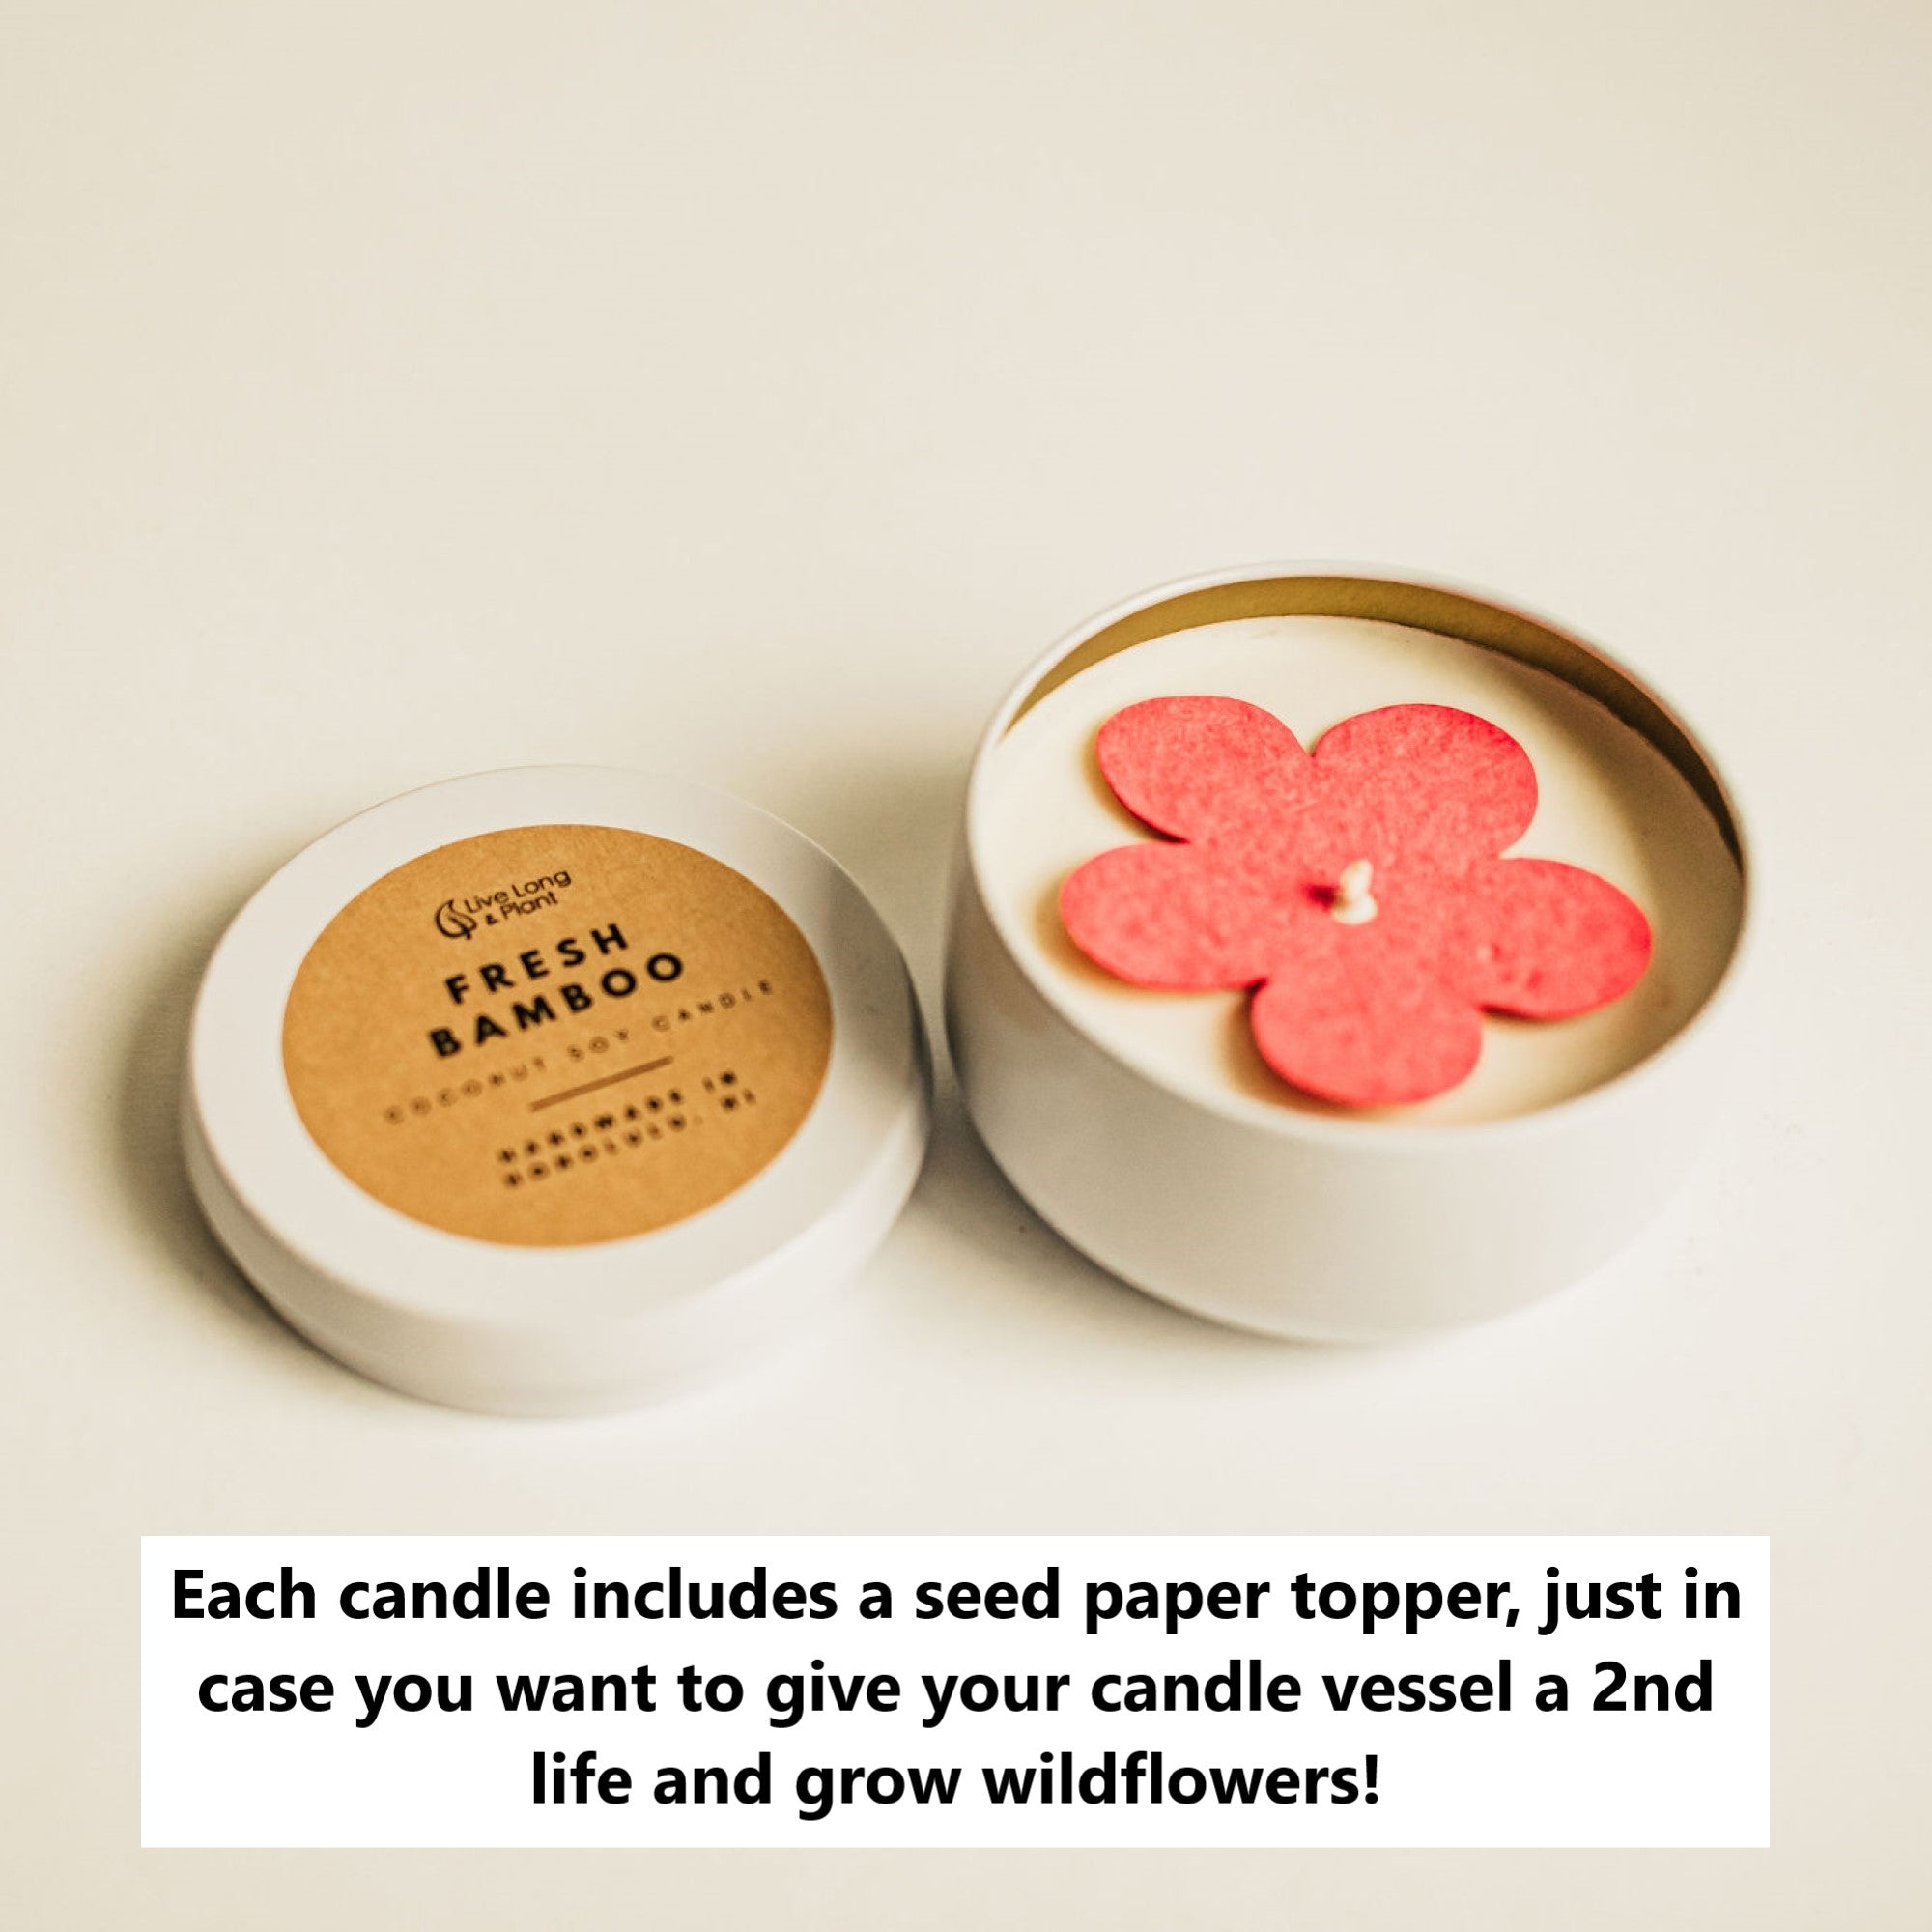 Handmade Scented Soy Candle, 6 oz., Includes Seed Paper to Grow Wildflowers